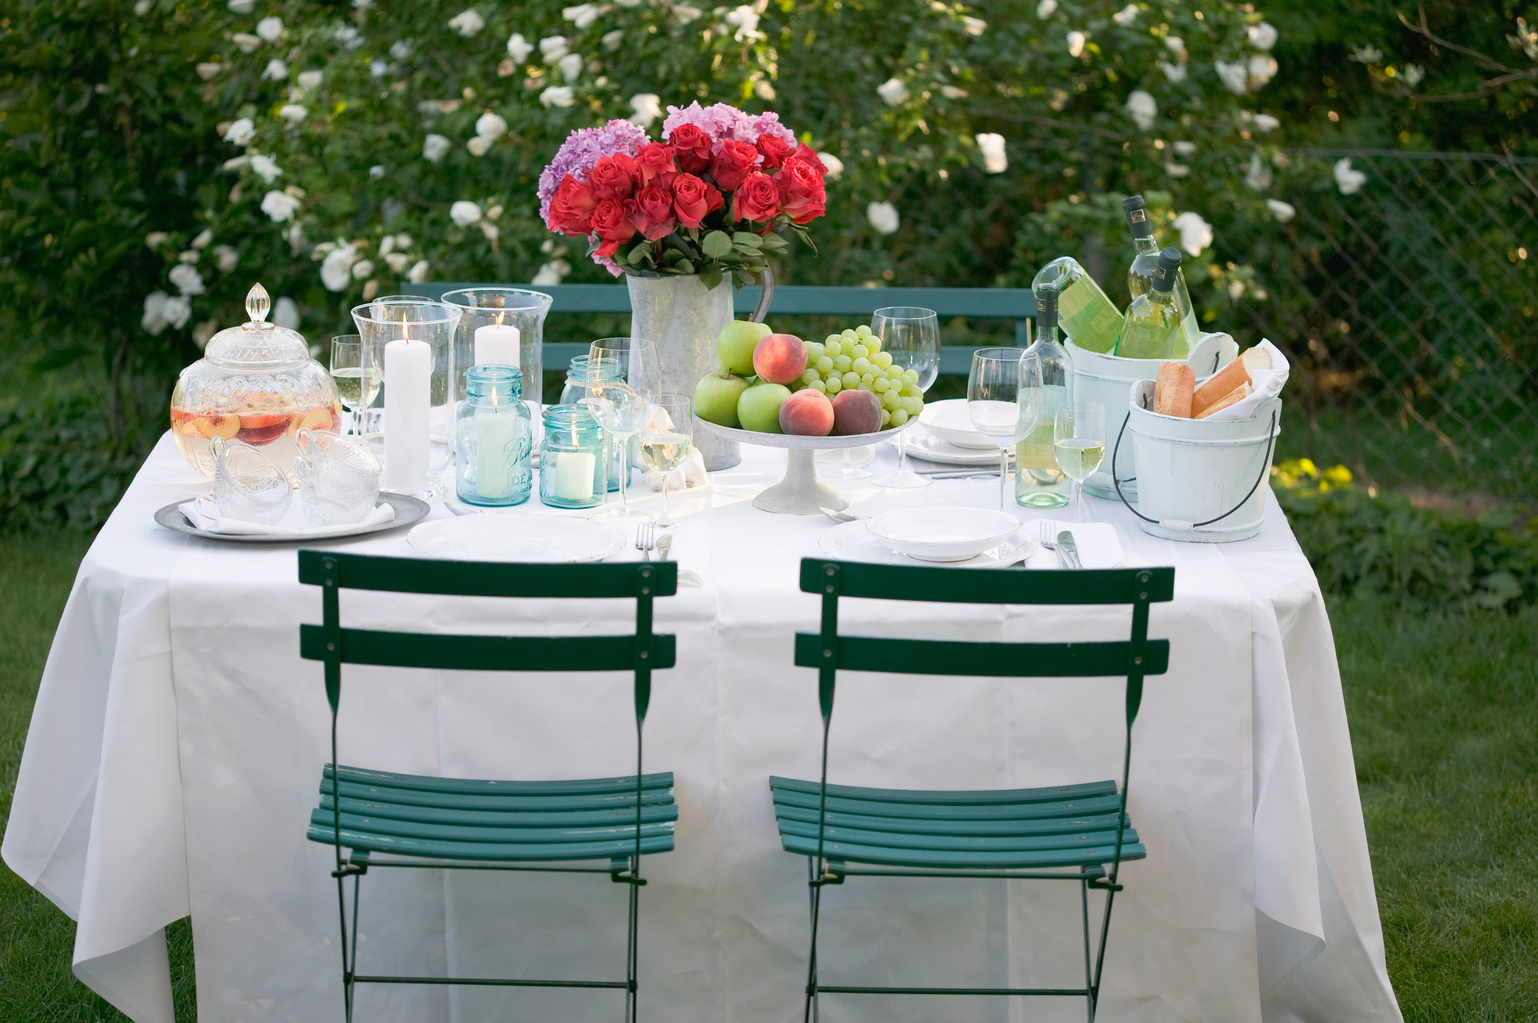 Table Setting for a Garden Party